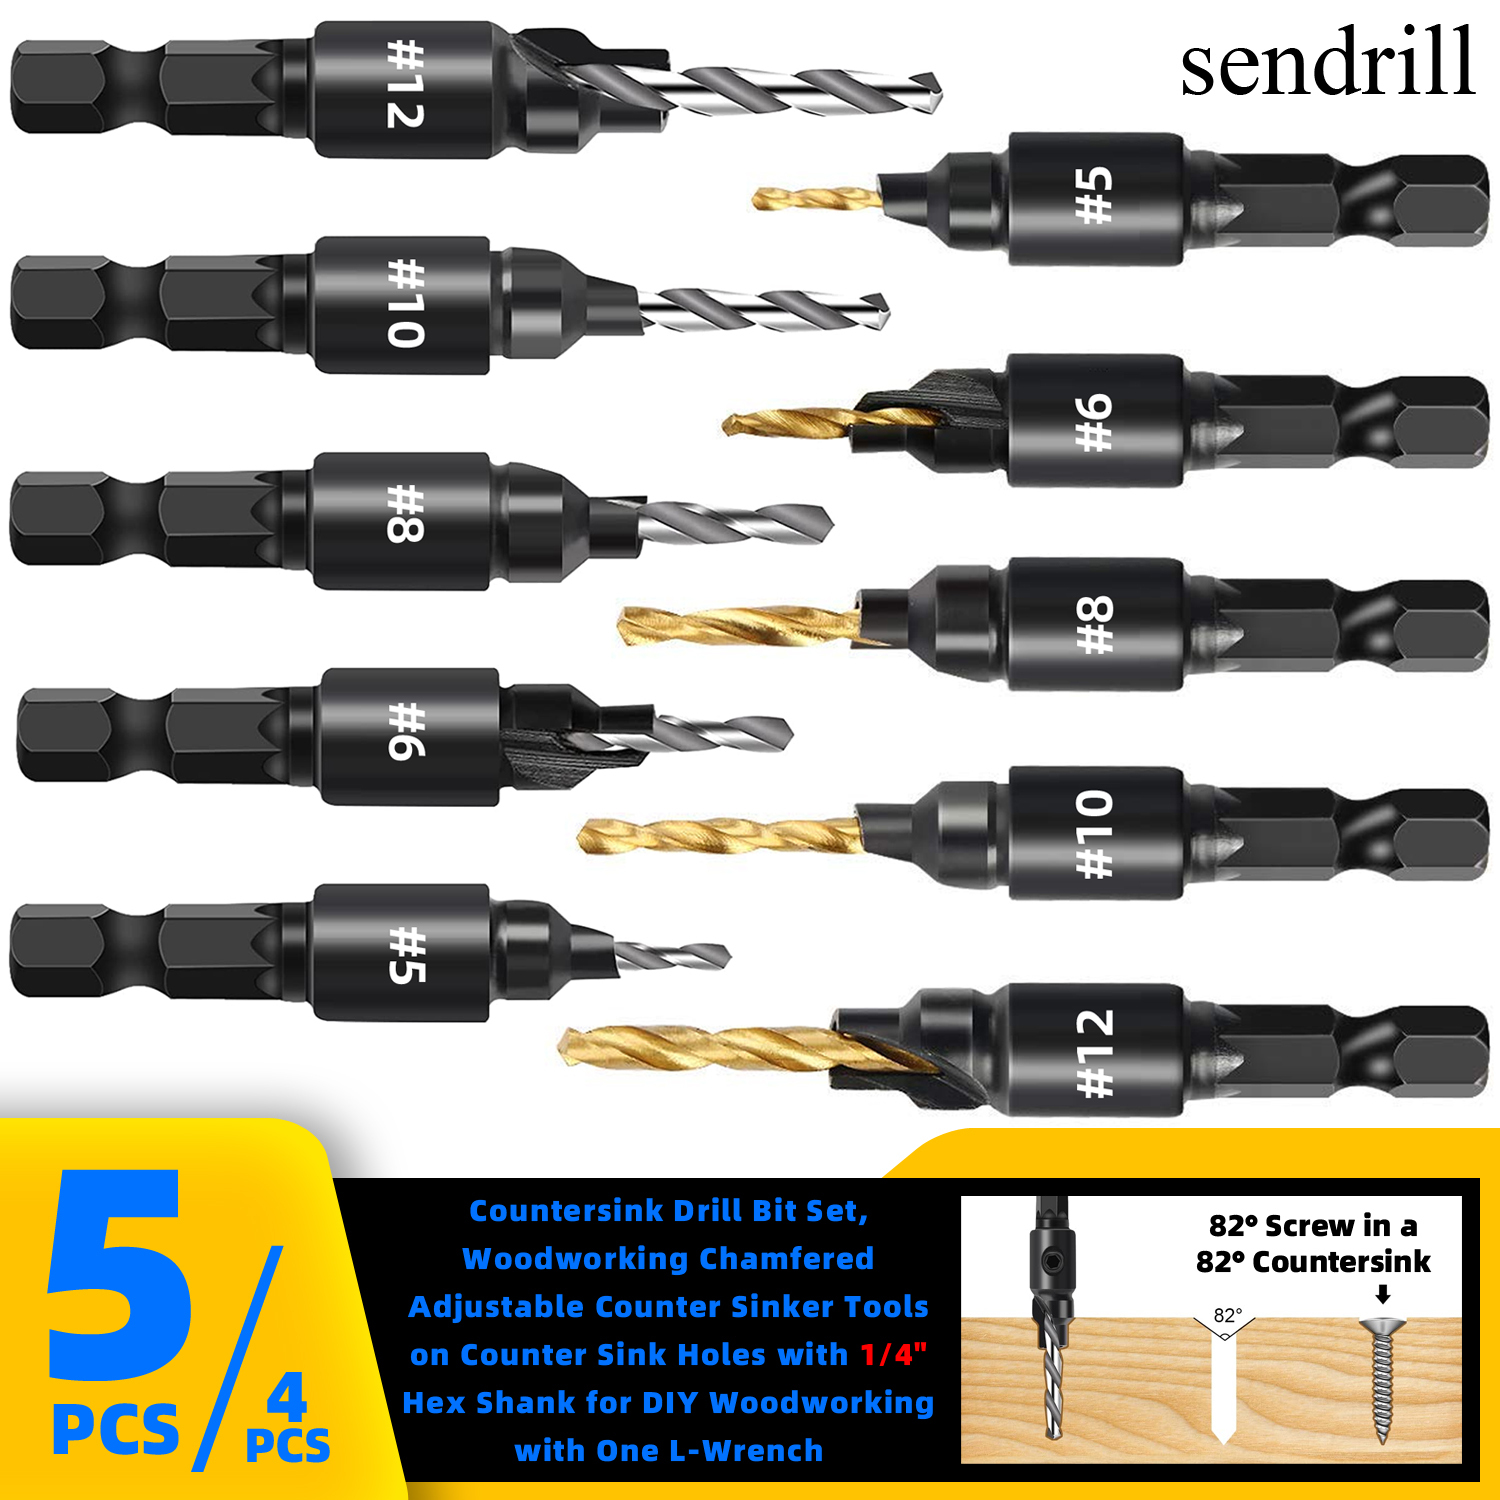 

4/5pcs Woodworking Countersink Drill Bit Set, With 1/4" Hex Shank For Diy Woodworking With 1 L-wrench #5 #6 #8 #10 #12